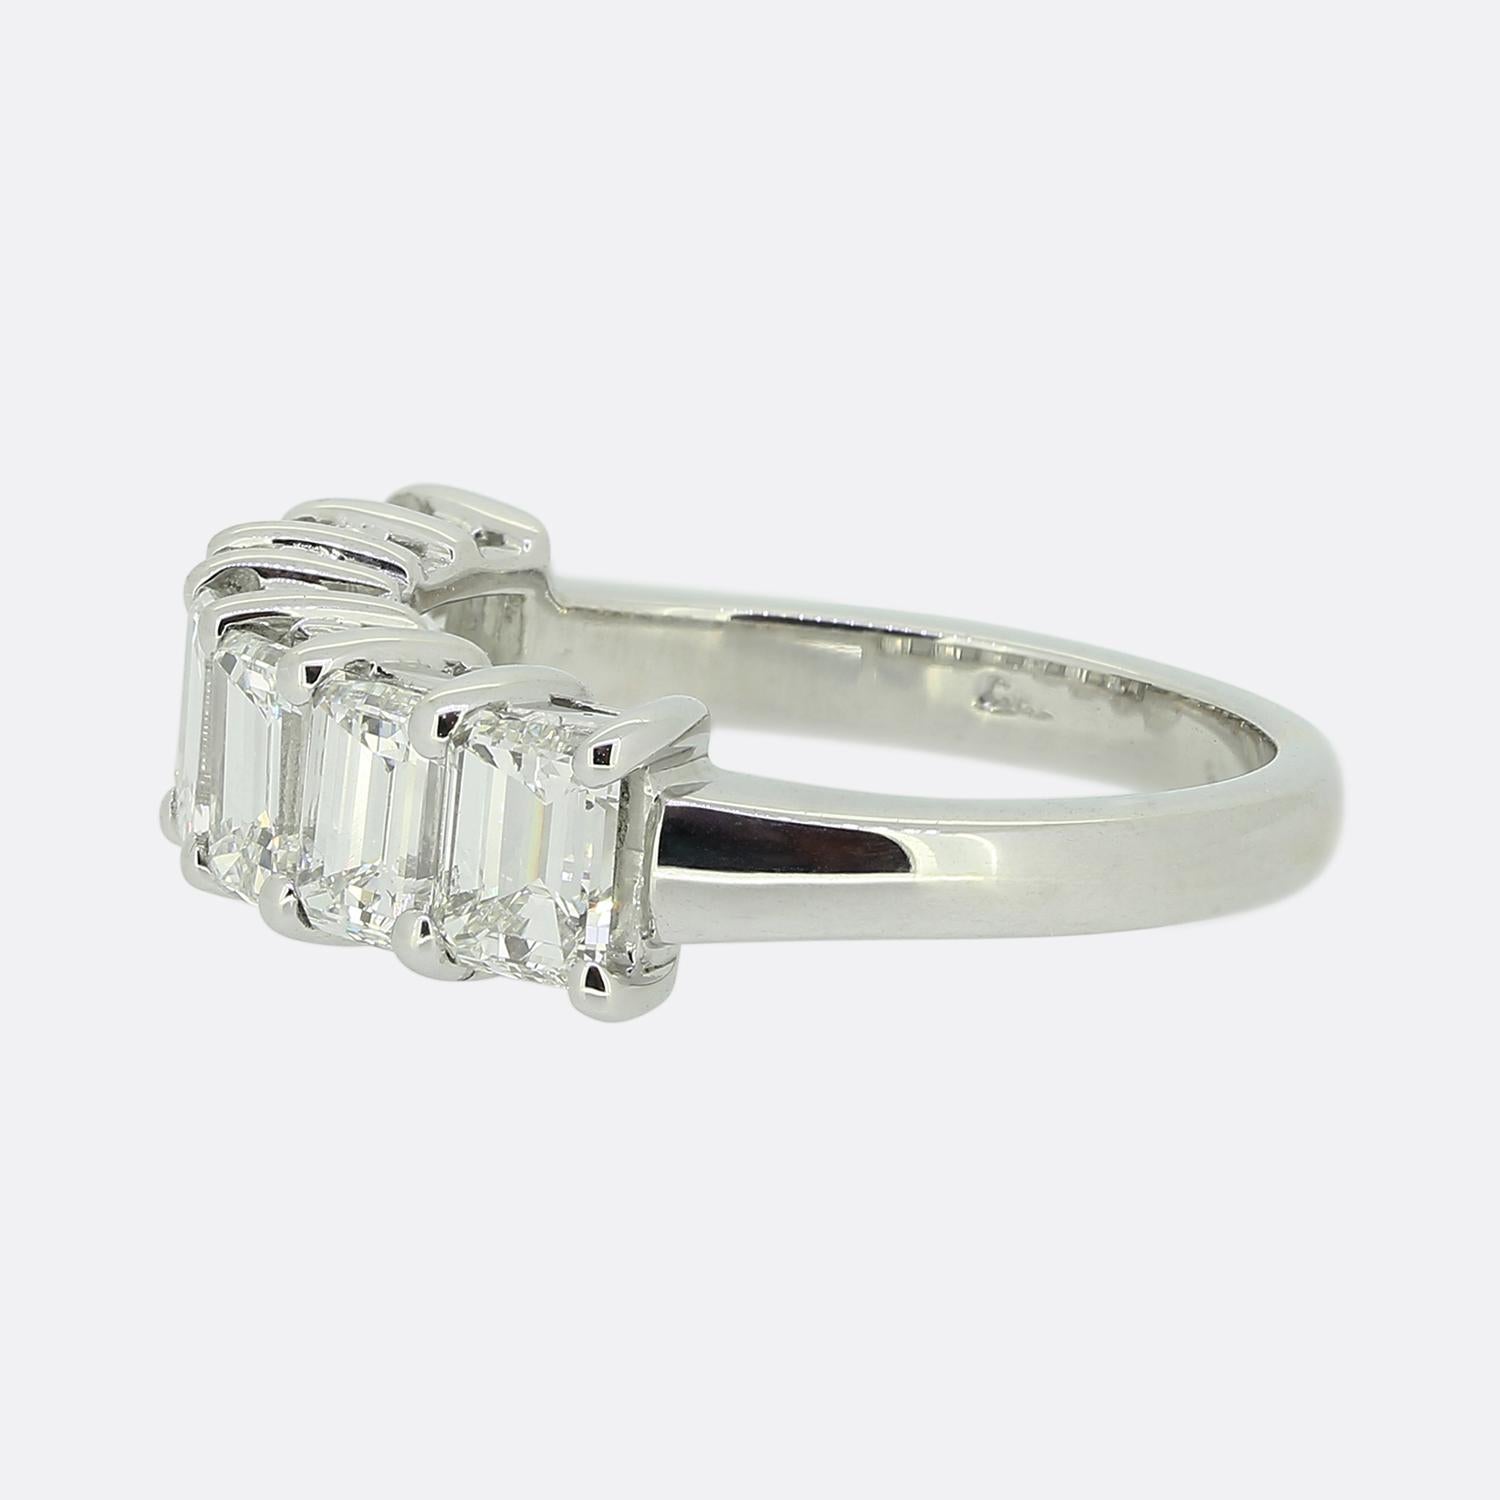 Here we have an outstanding seven-stone diamond ring. This timeless piece has been crafted from 18ct white gold and showcases seven wonderfully matched emerald cut diamonds in a single line formation. Each bright white stone has been individually